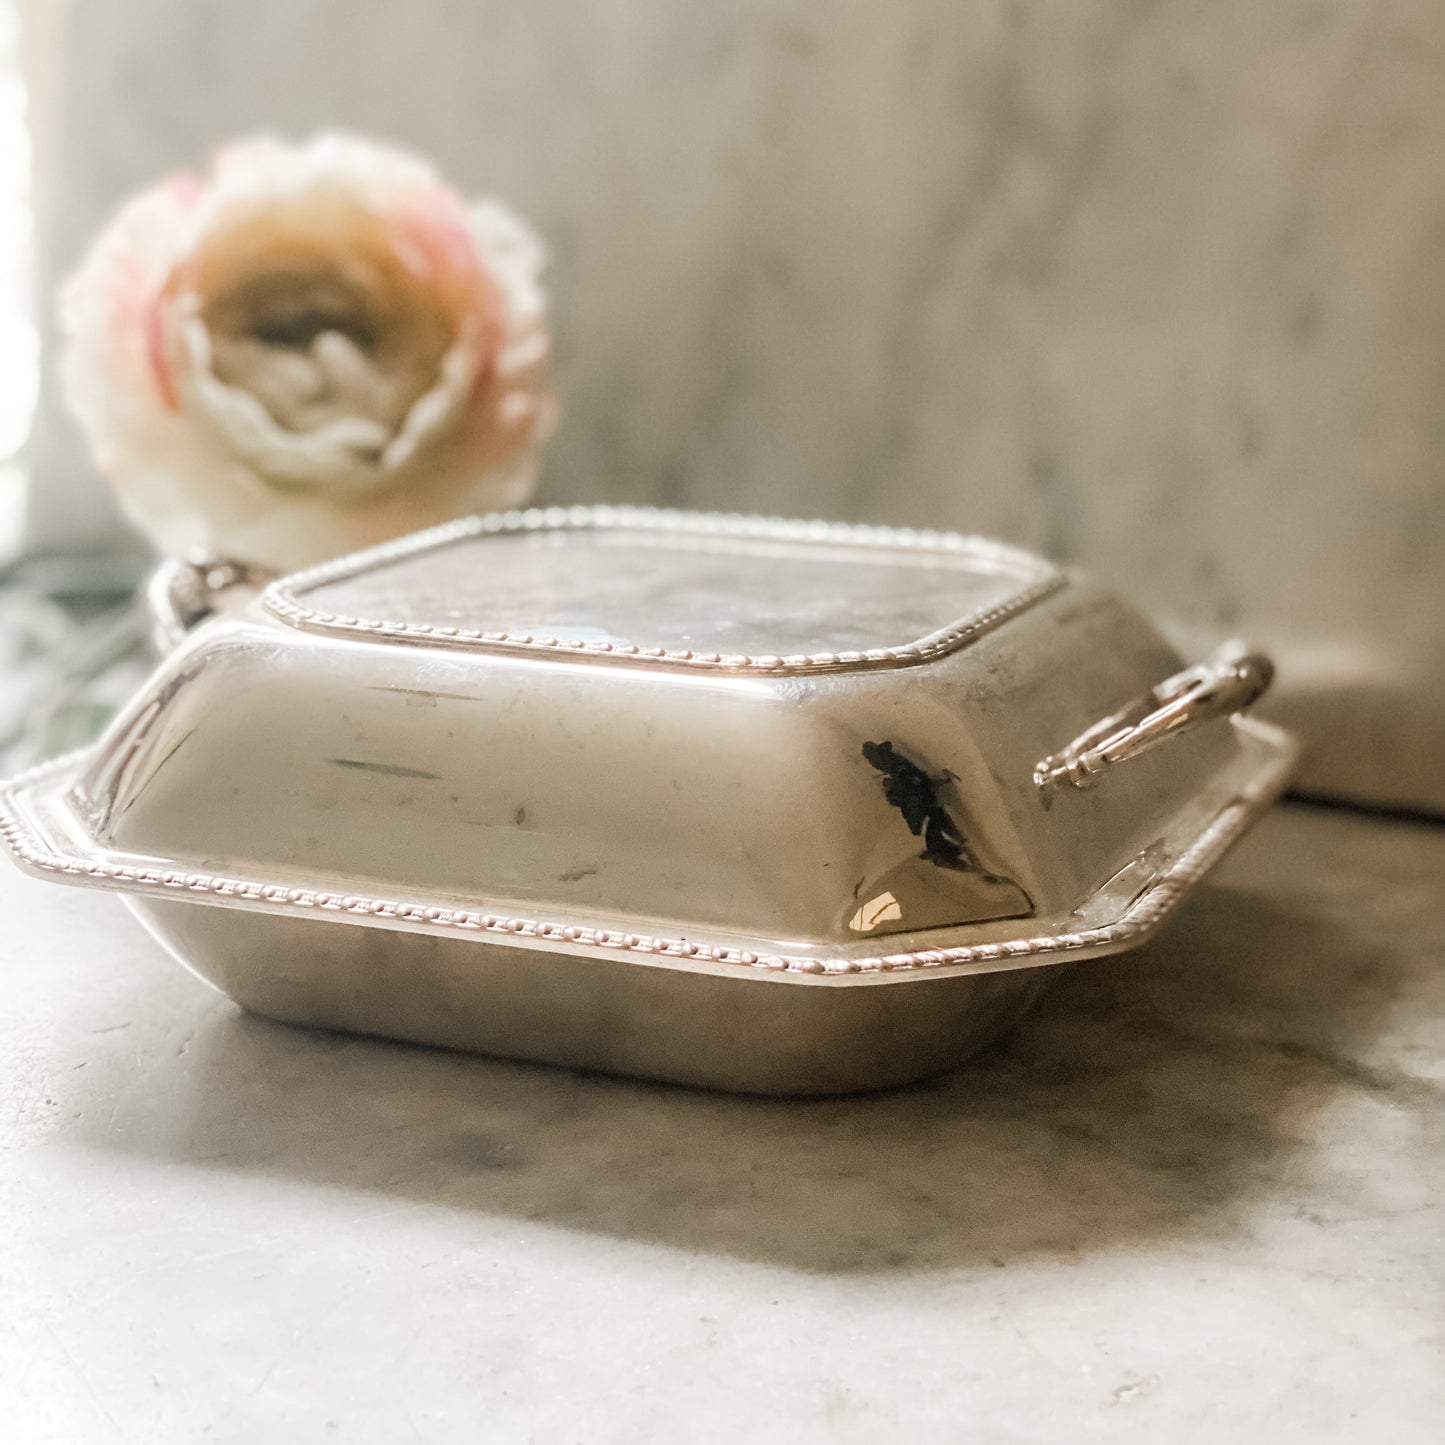 Delightful Roped Edge Covered Dish